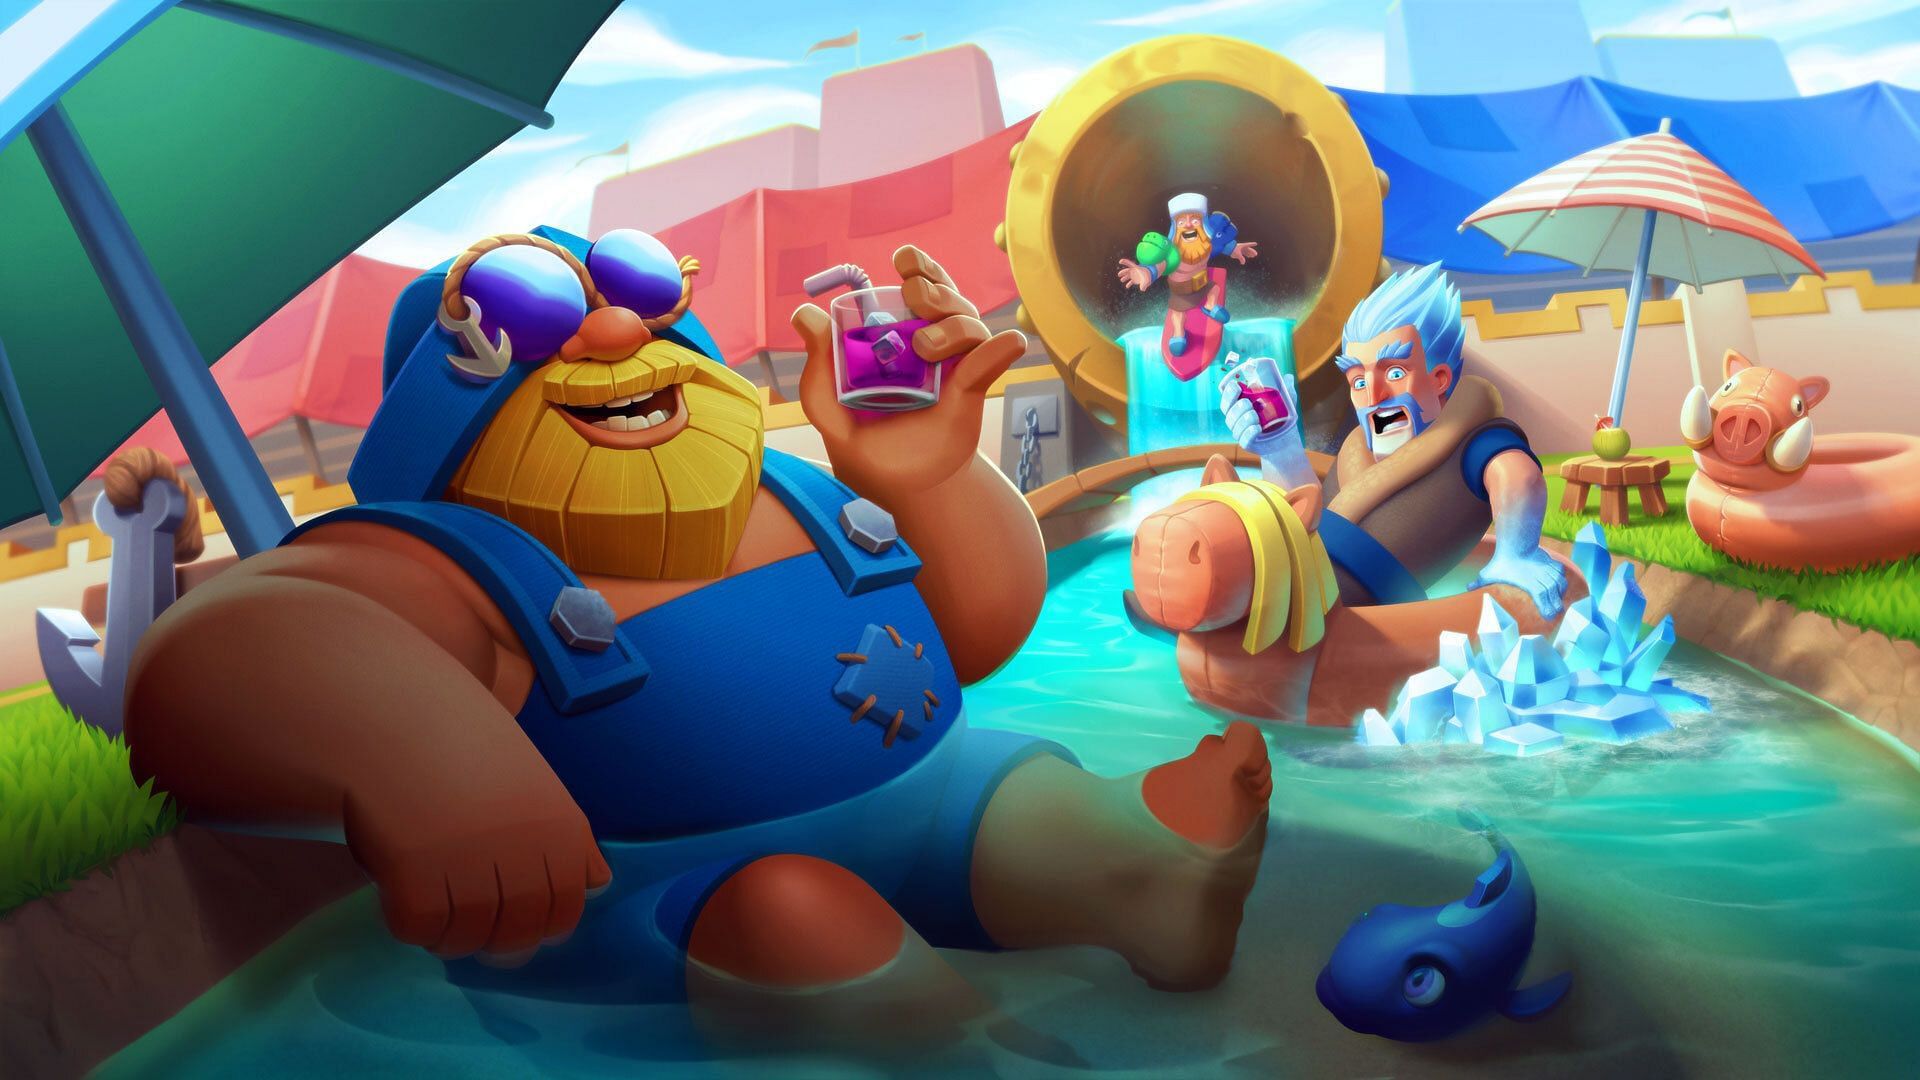 Official poster (Image via Supercell)